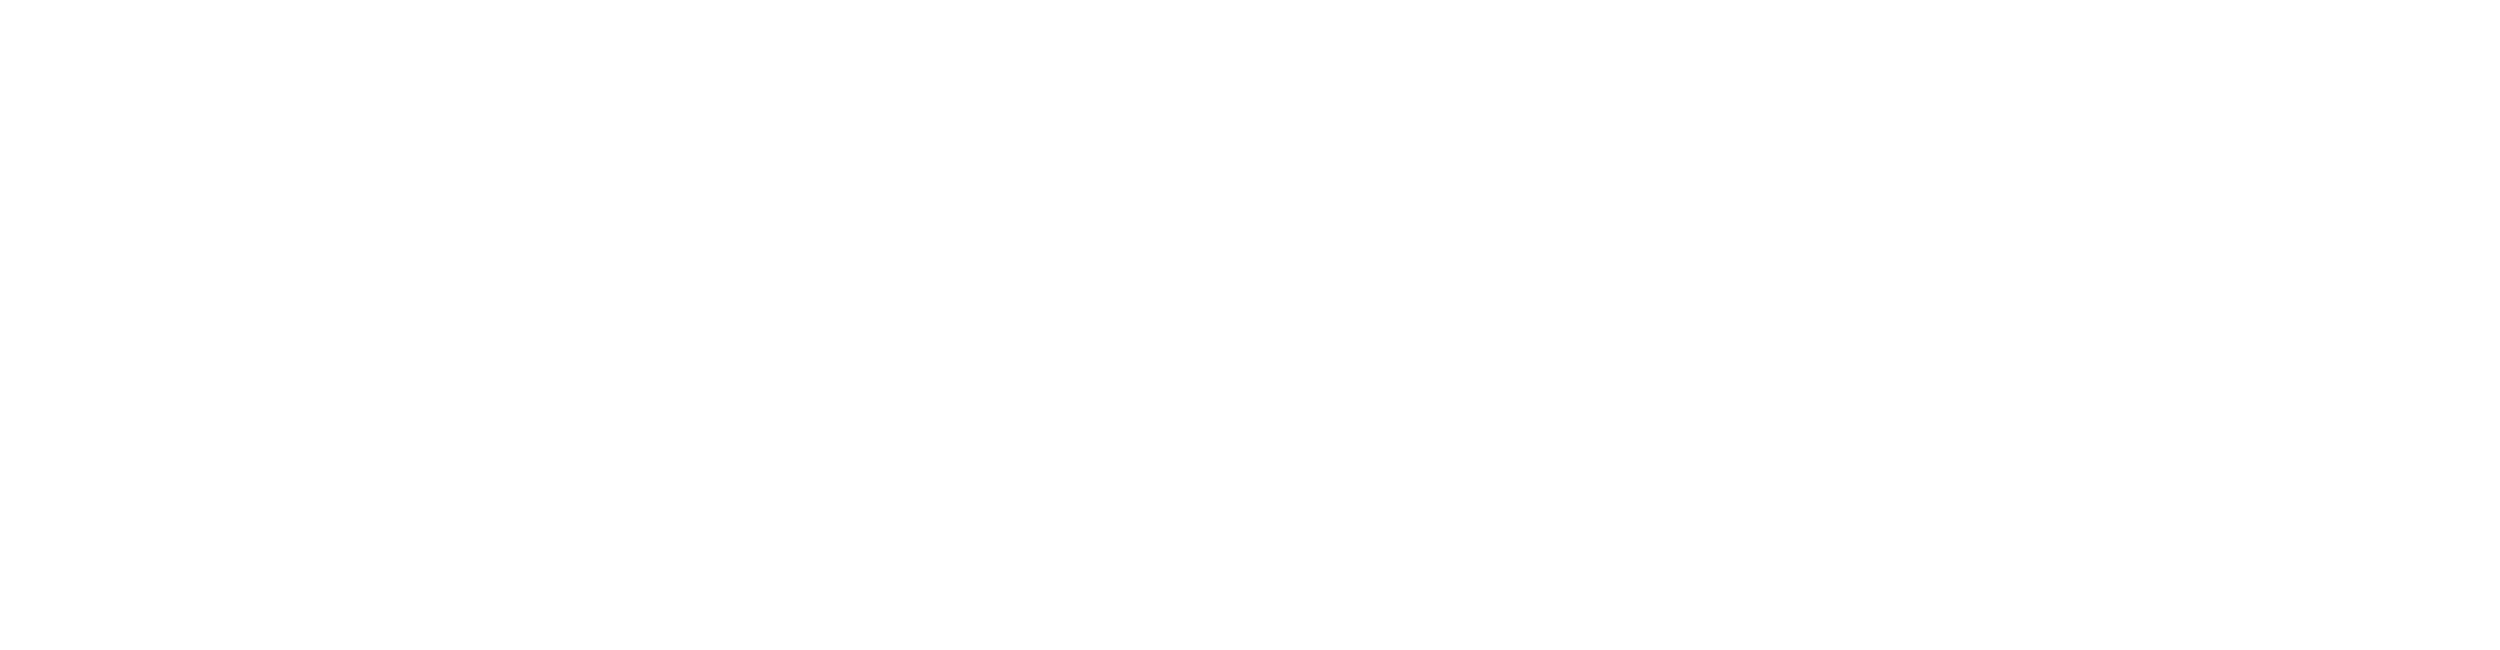 ‘ODI notes the remarkable degree of co-operation between the Taliban and the Government … Bad governance is the root cause of conflict and functioning institutions are the key to stability.’ –Baroness D’Souza, former Lord Speaker, House of Lords